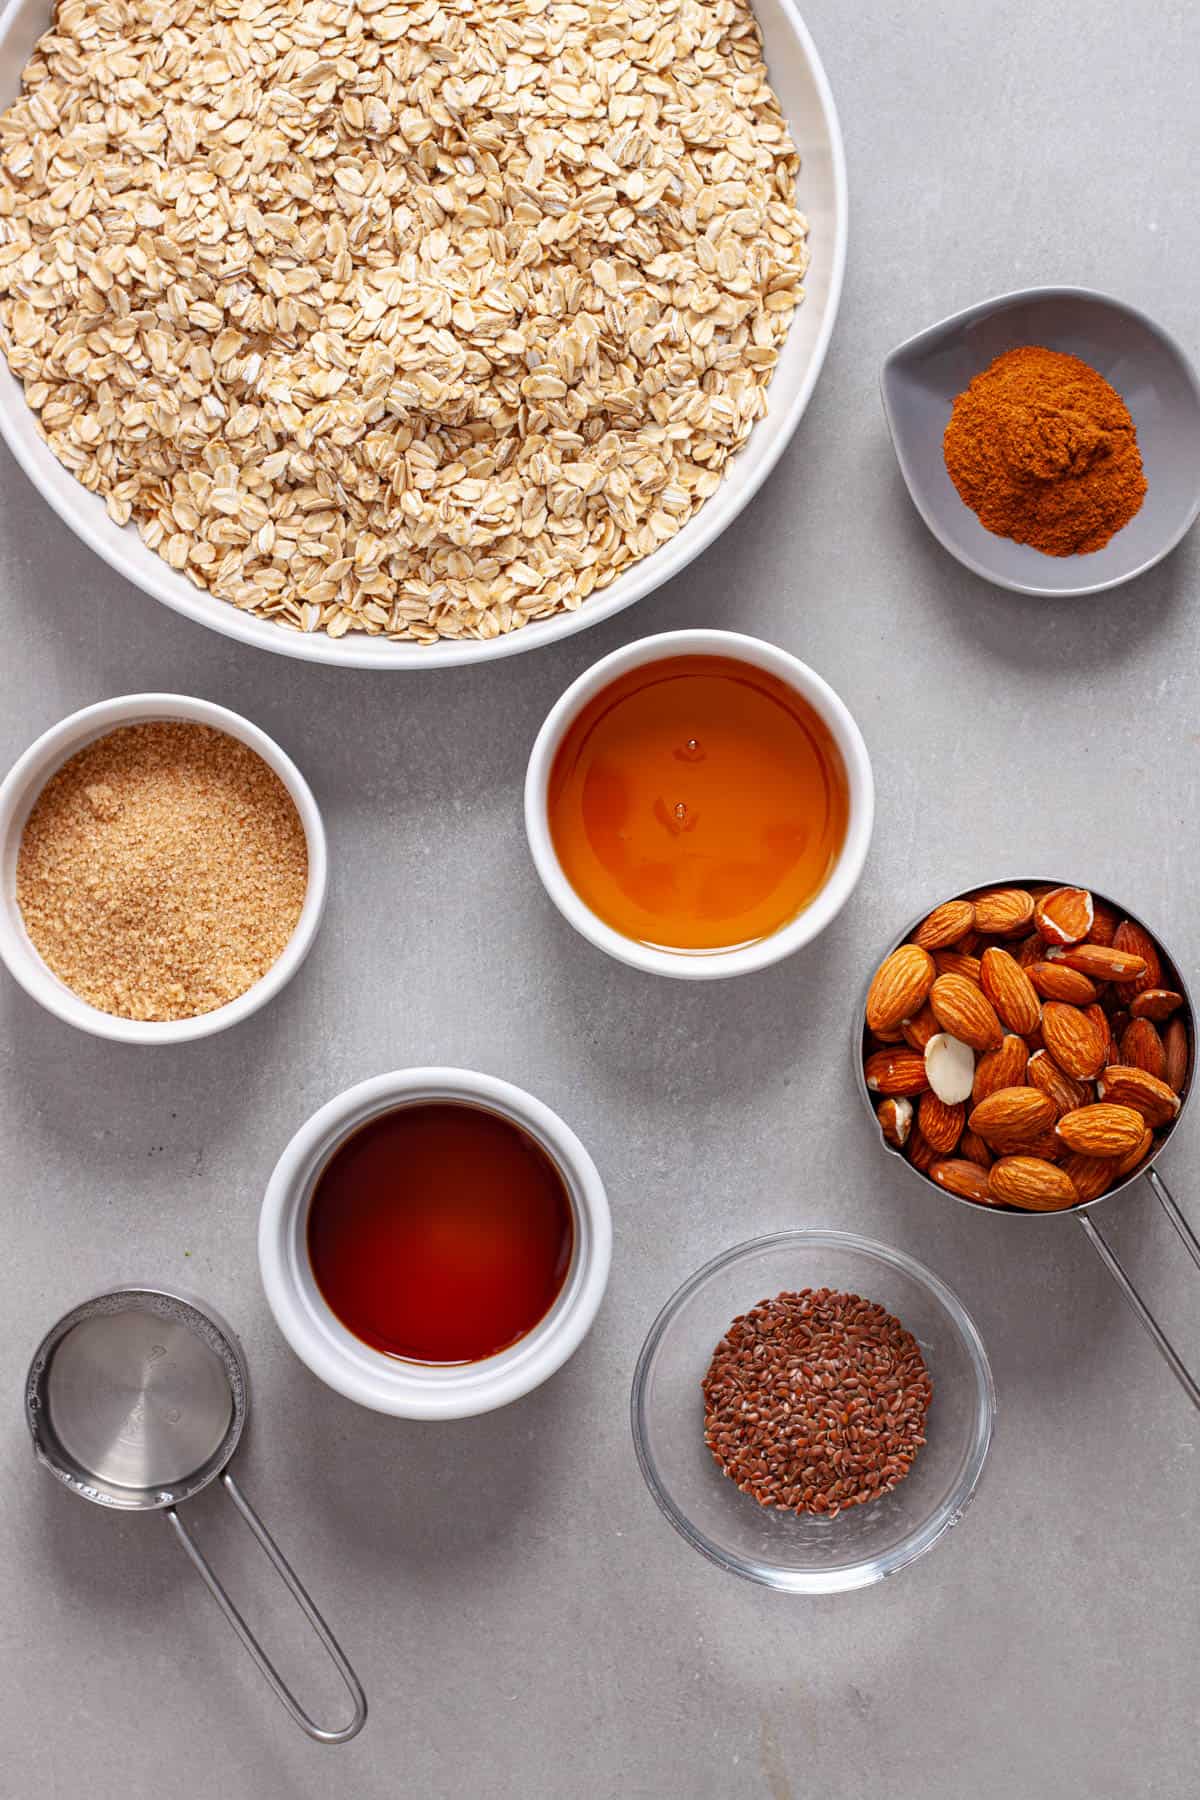 Ingredients for homemade cinnamon granola on a gray table.